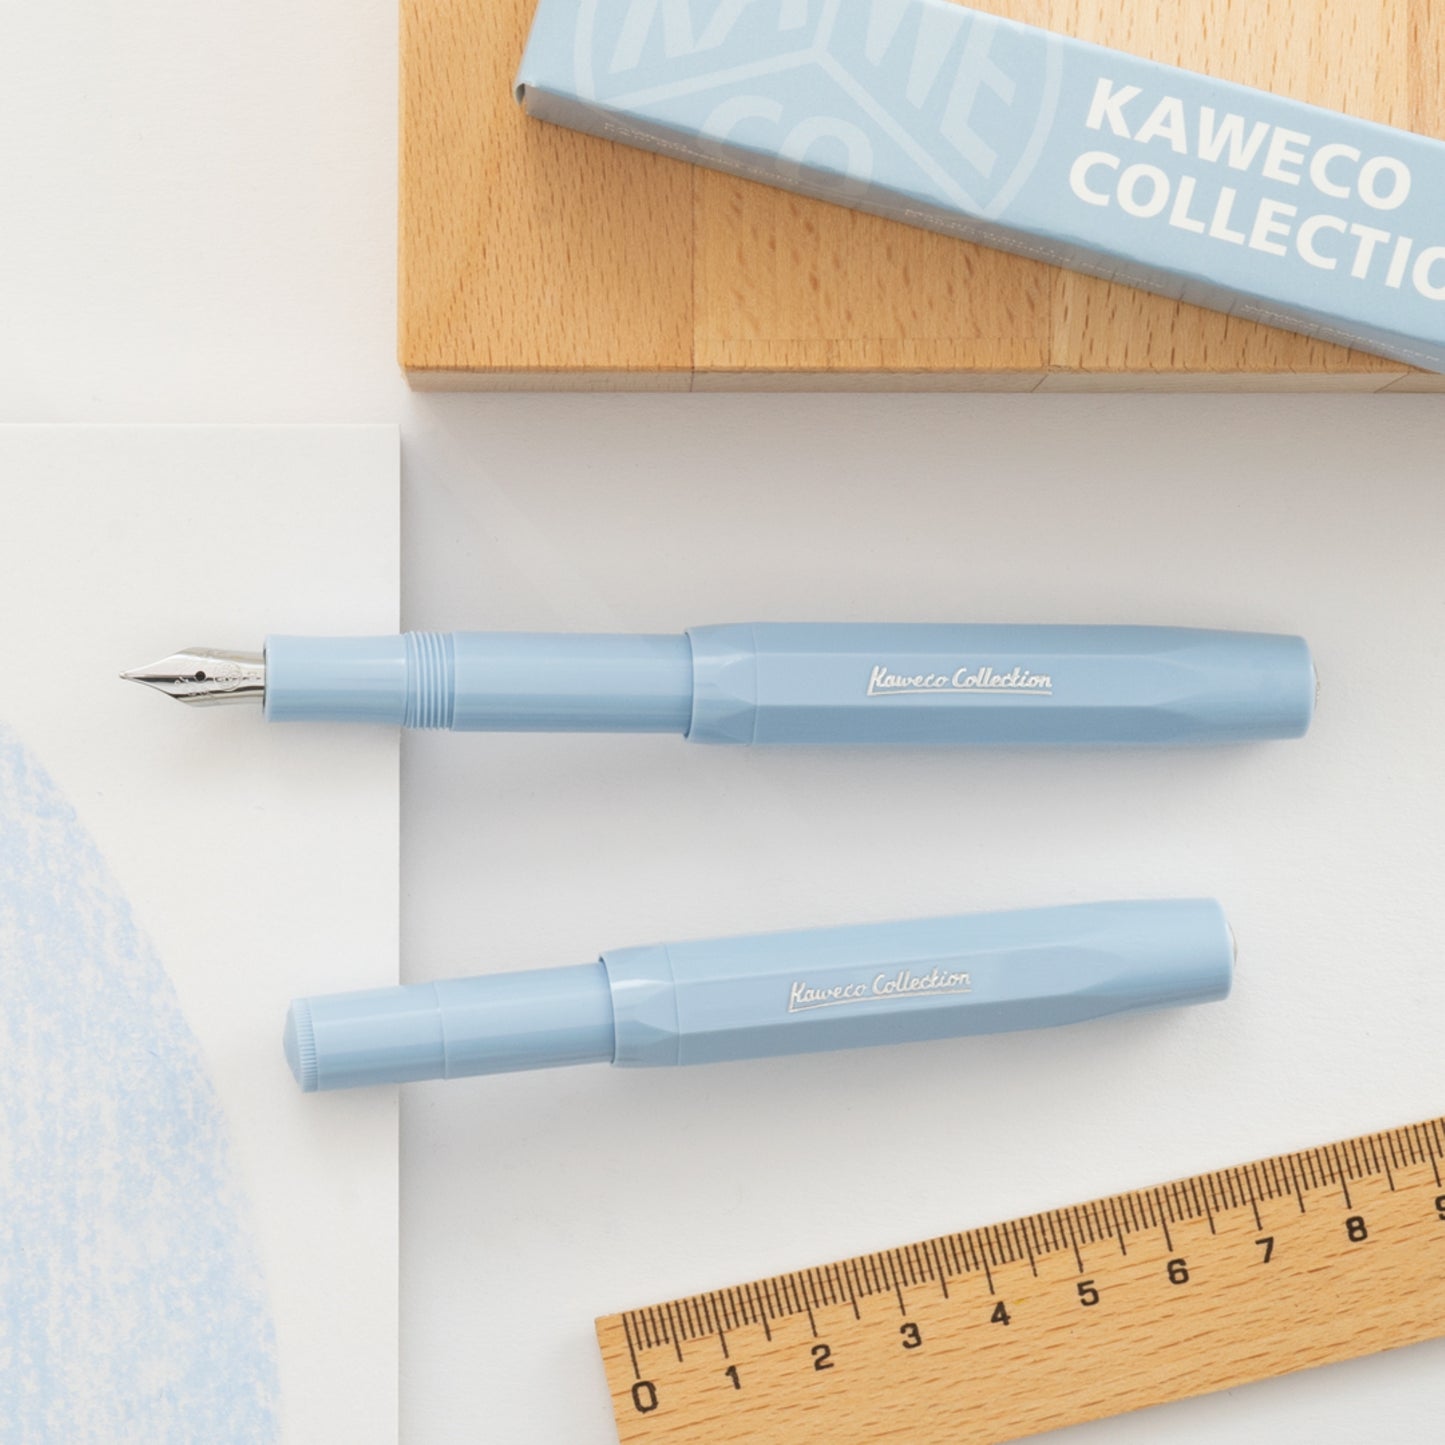 Kaweco Collection Sport fountain pen in mellow blue, pictured with cap posted and presentation box.